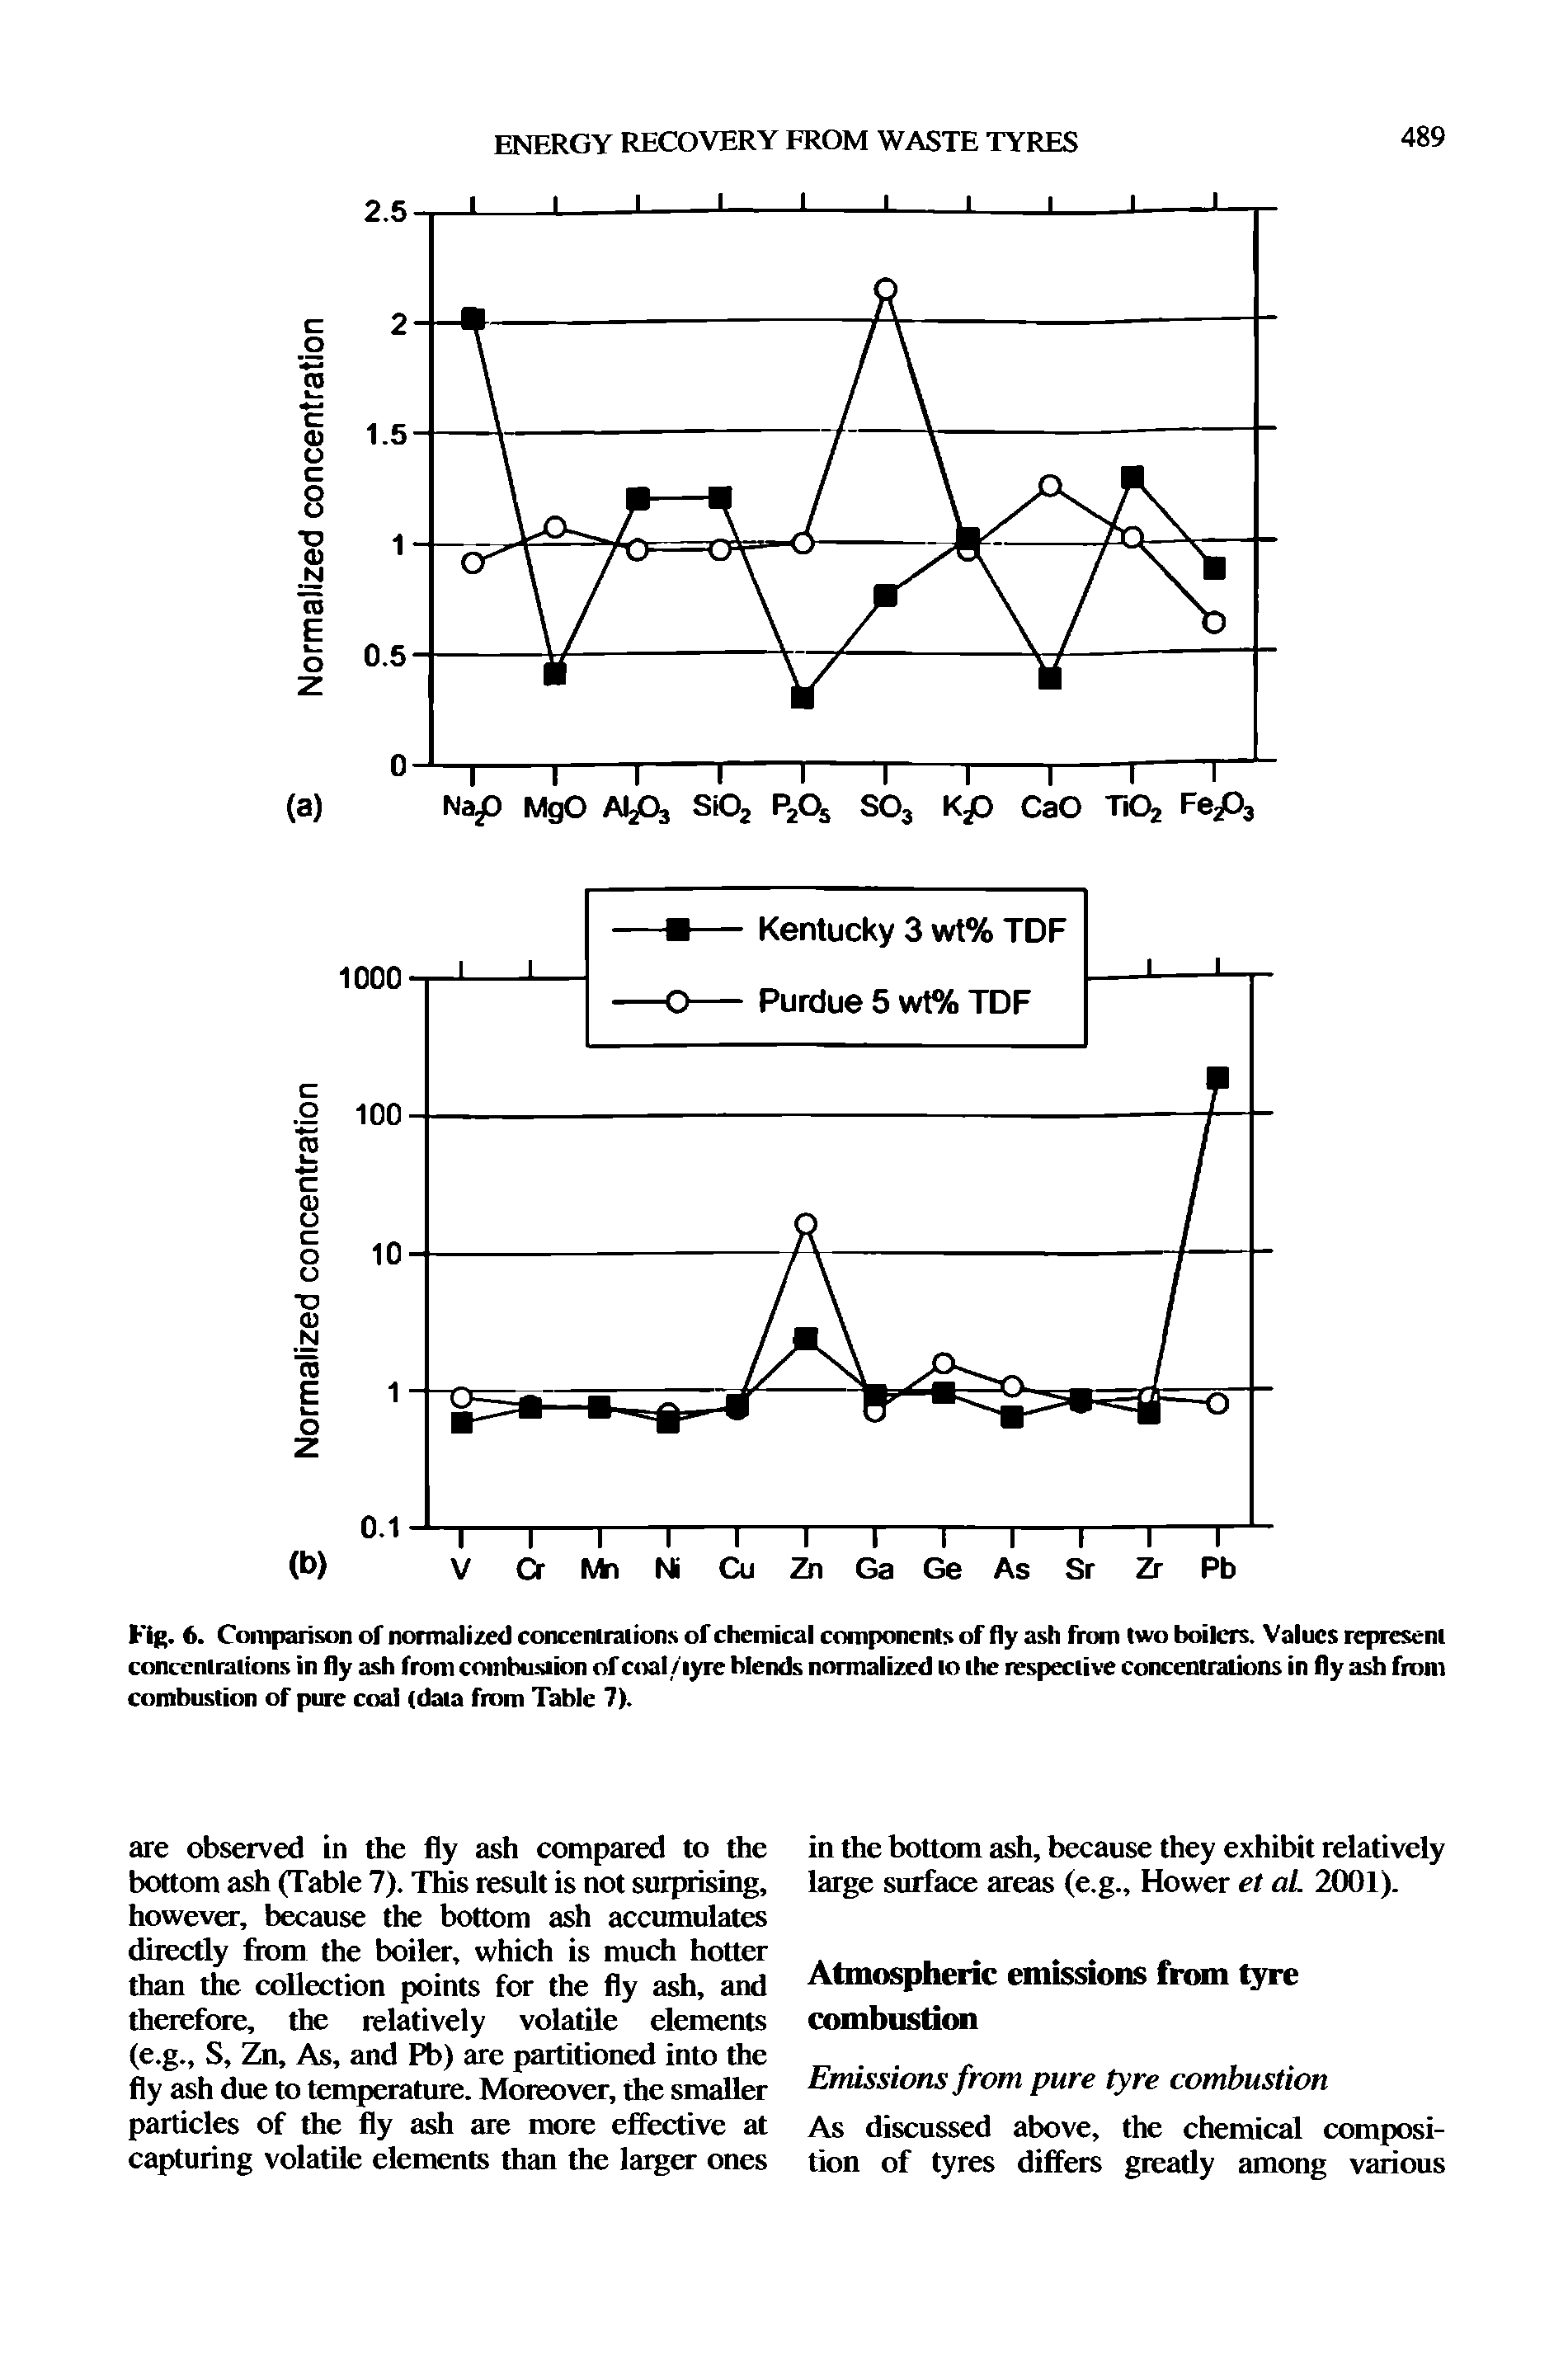 Fig. 6. Comparison of normalized concentrations of chemical components of fly ash from two boilers. Values represent concentrations in fly ash from combustion of coal / tyre blends normalized to the respective concentrations in fly ash from combustion of pure coal (data from Table 7).